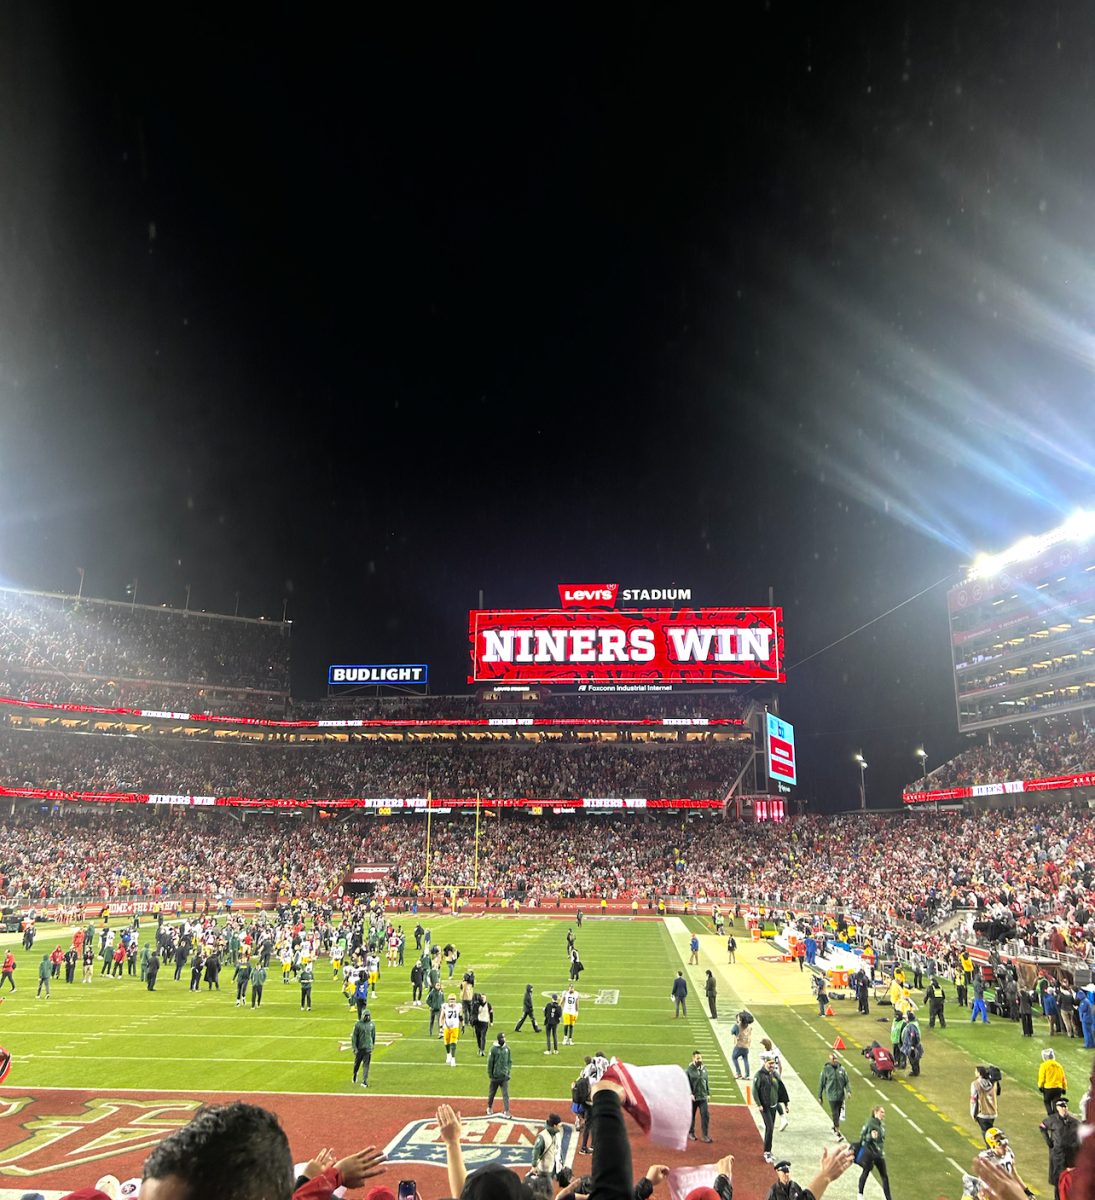 Levis+Stadium+following+the+49ers+24-21+victory+over+the+Green+Bay+Packers+in+the+NFC+Divisional+Round.+